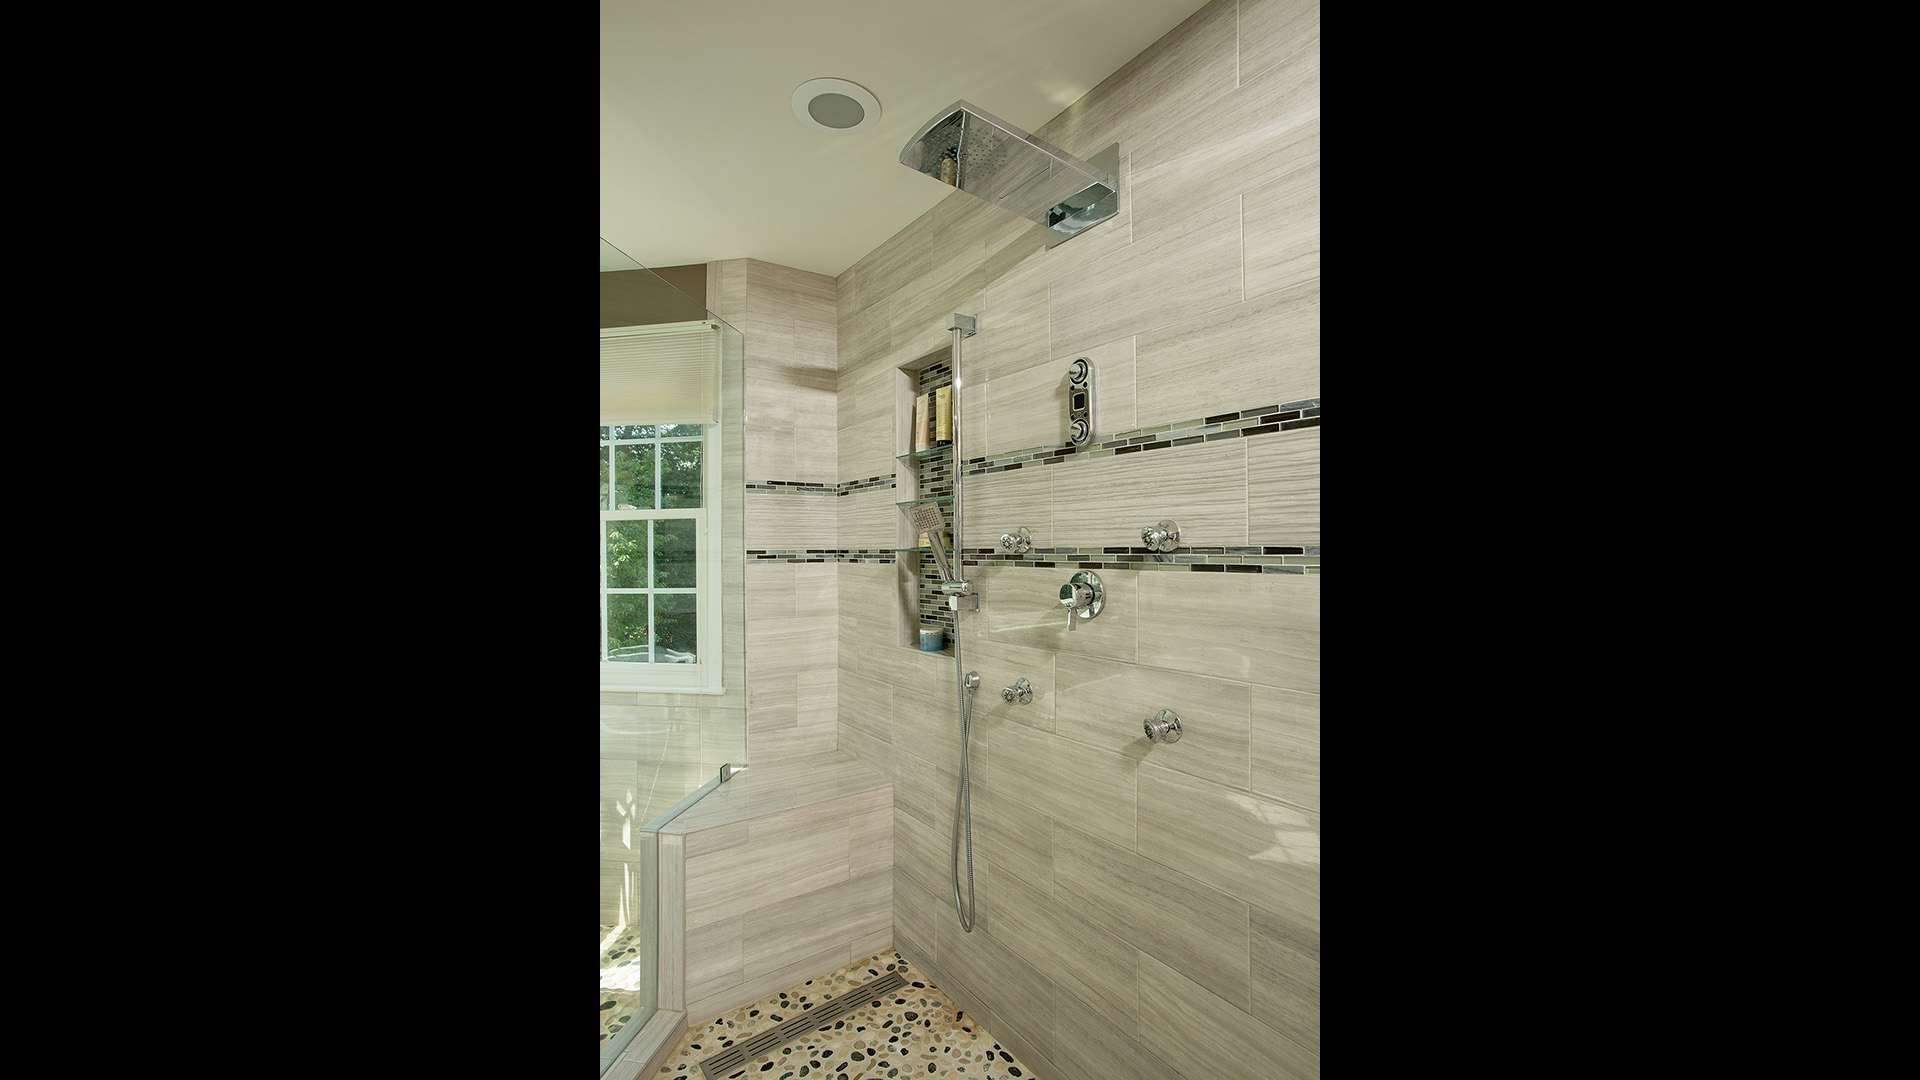 2017 National NARI Contractor of the Year Winner, Residential Bath $25,000 to $50,000